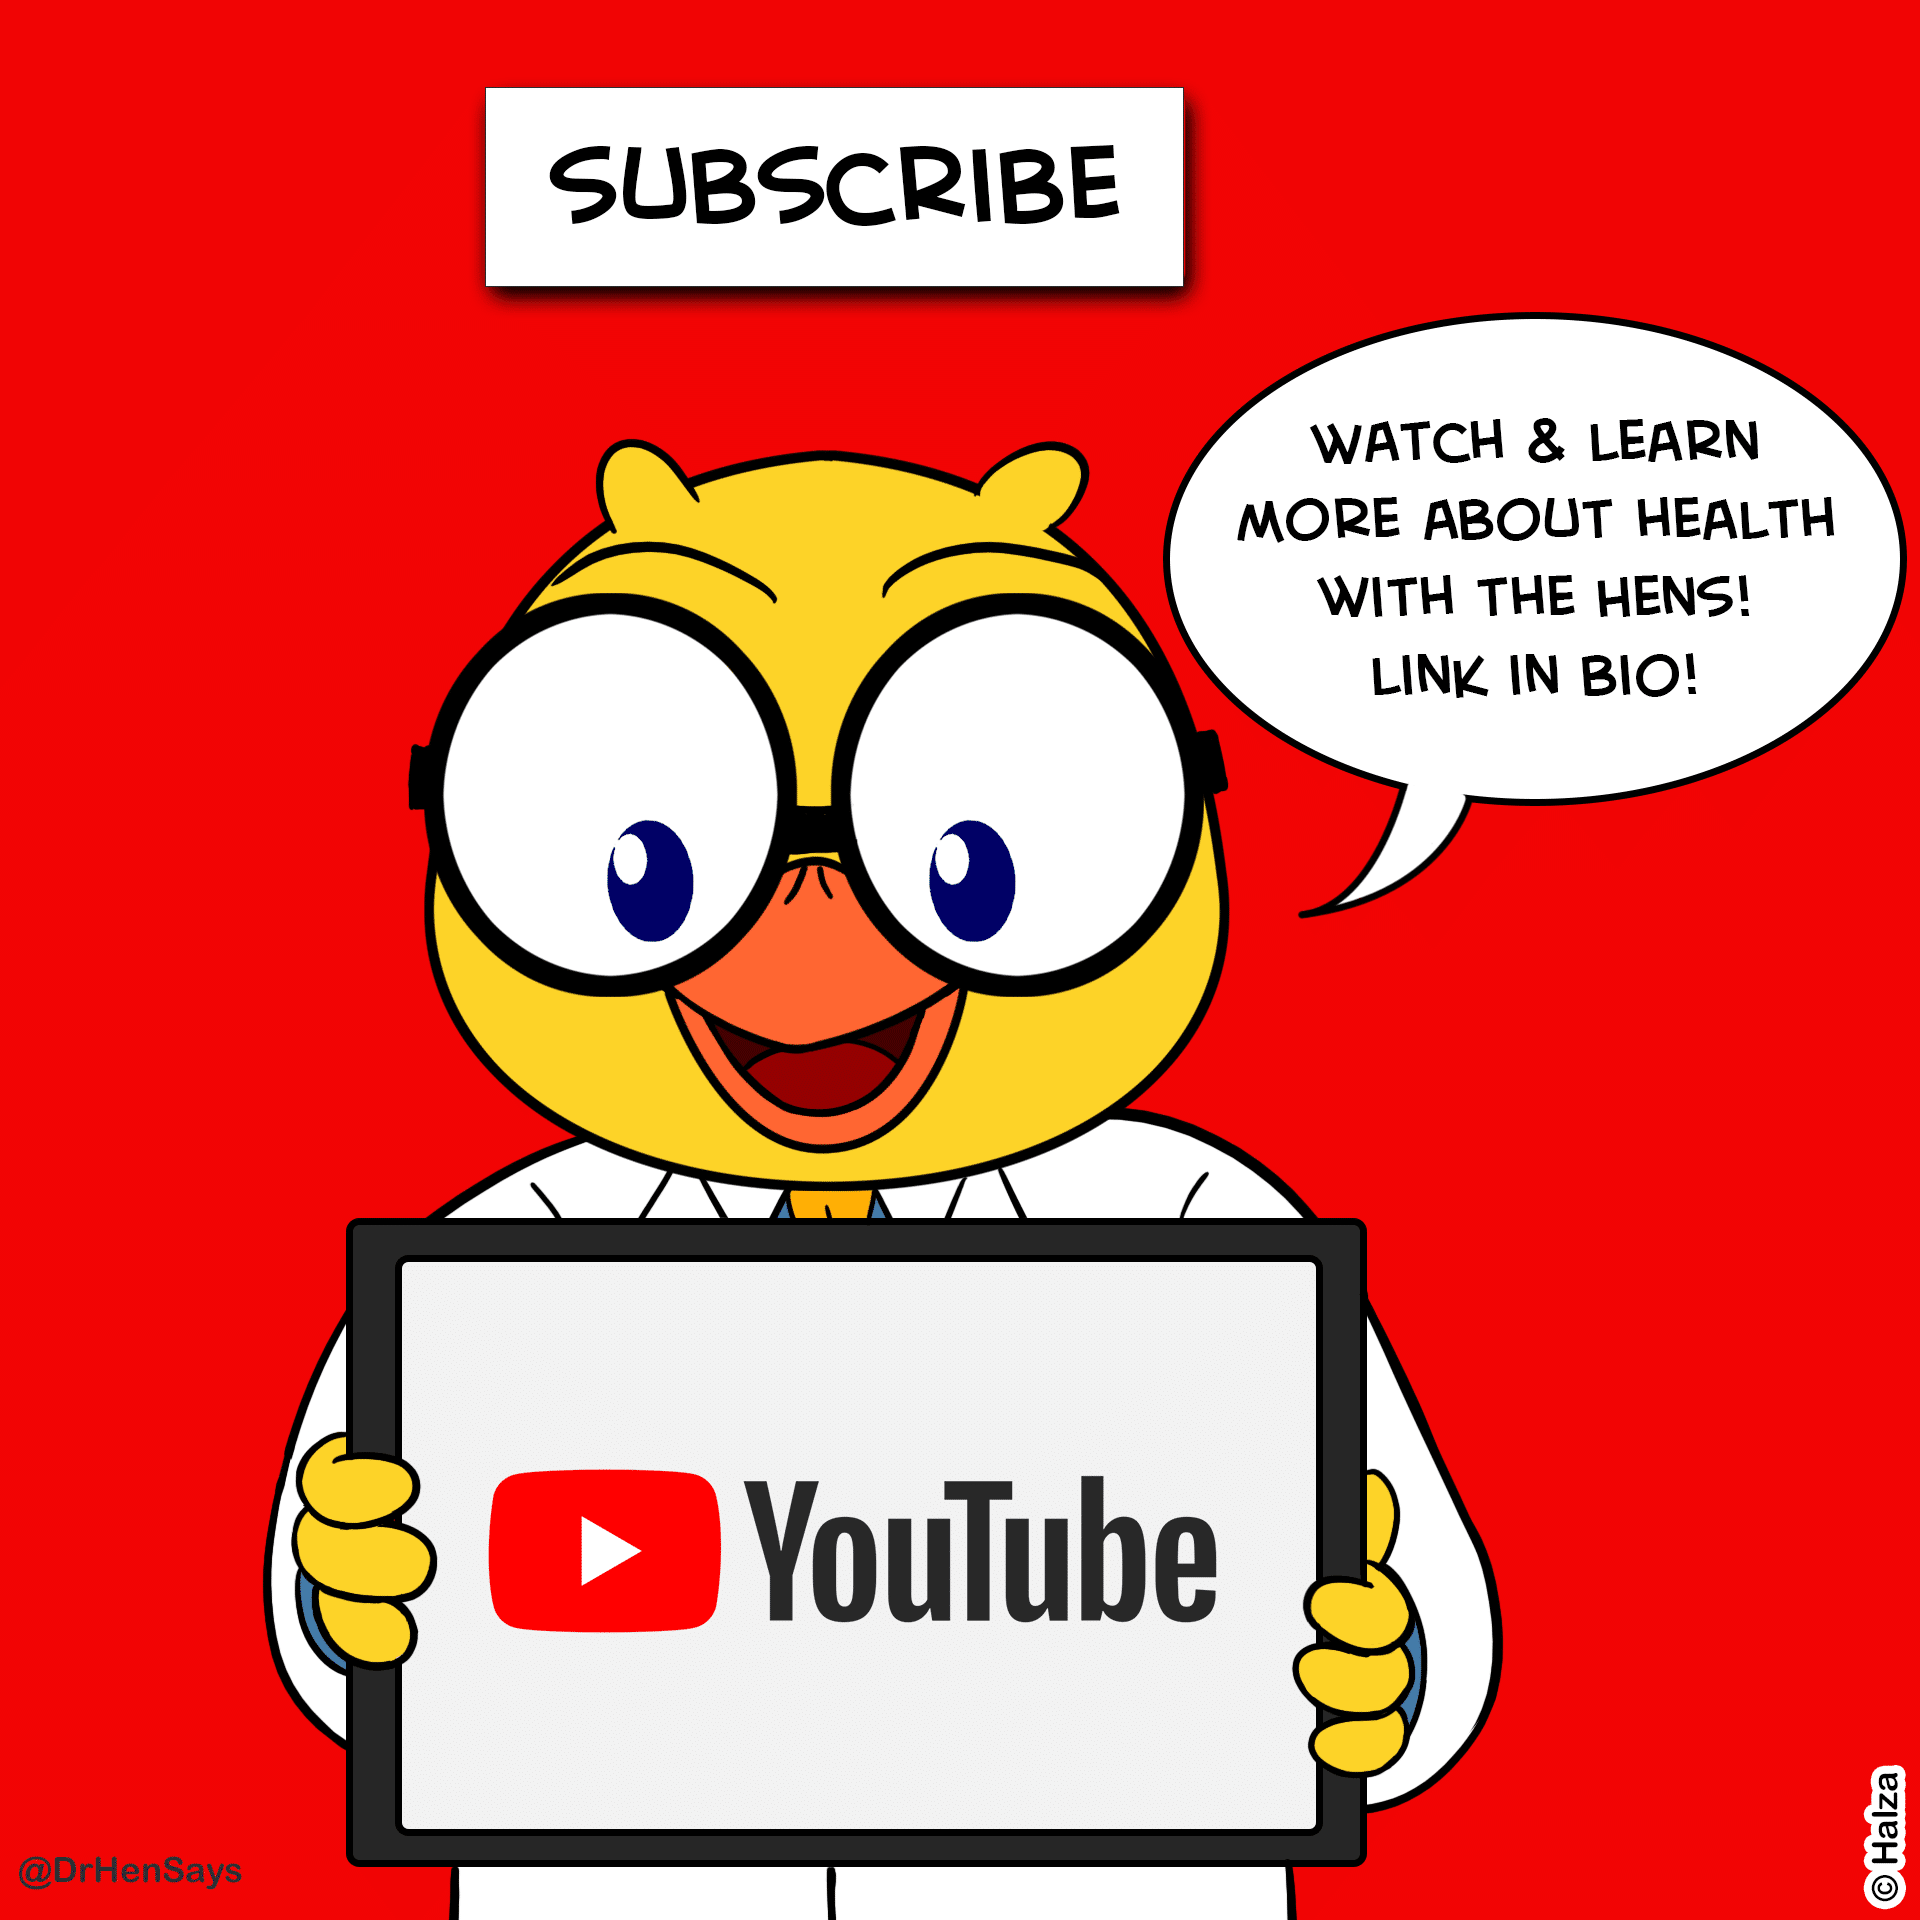 Subscribe on YouTube!